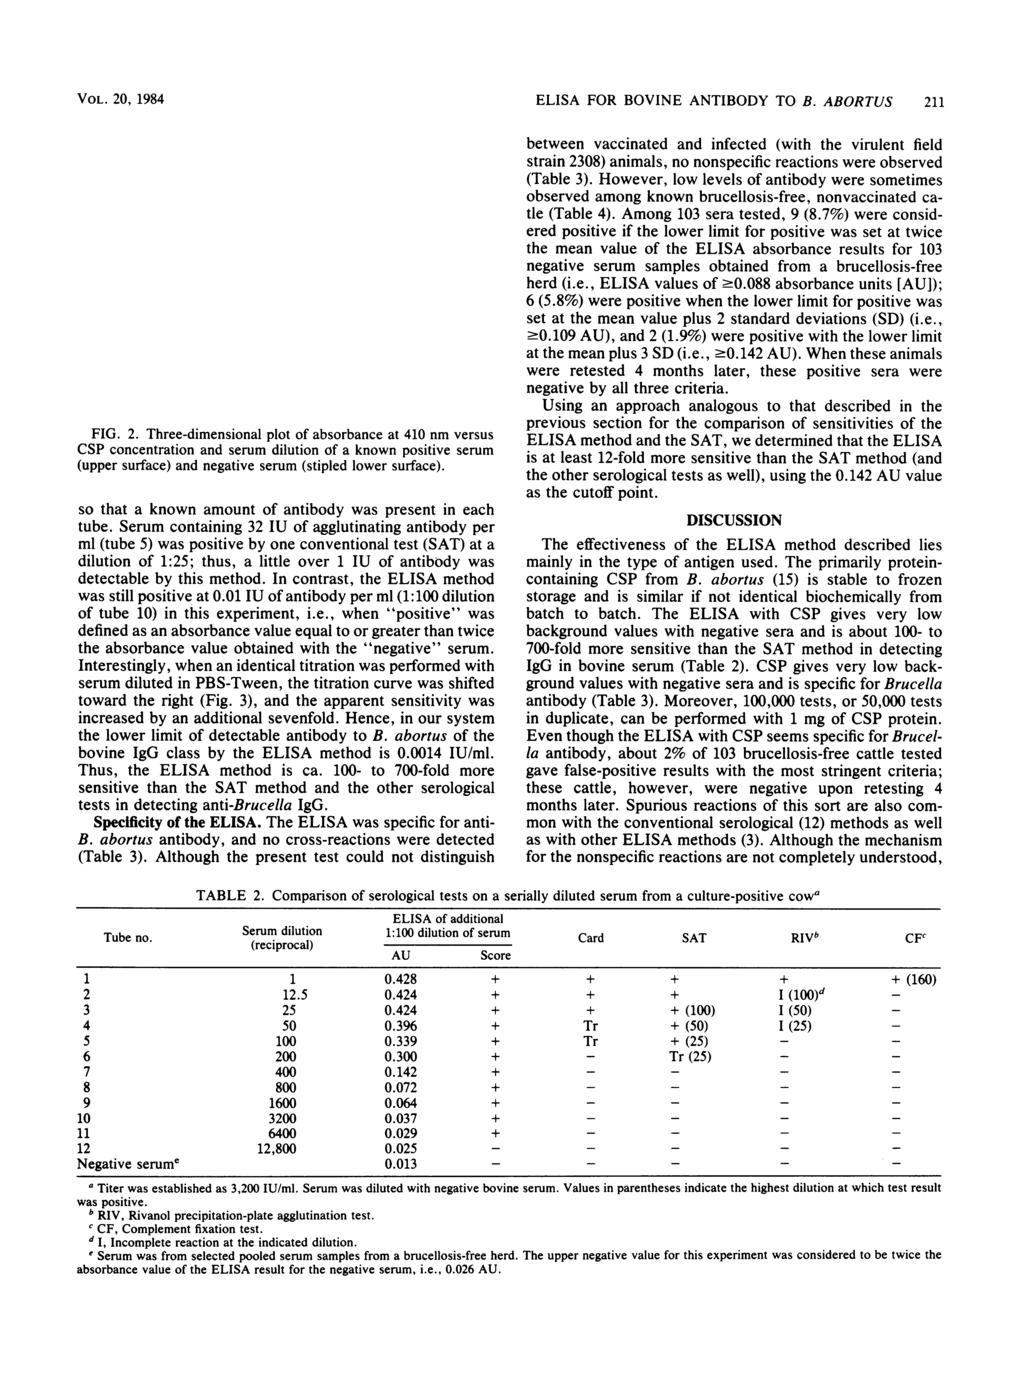 VOL. 20, 1984 2 er -:I LLJ w Cr m CD) cn -: 0.7 0.6 0.5-04 0. 3-0.2-0.1 0 FIG. 2. Three-dimensional plot of absorbance at 410 nm versus CSP concentration and serum dilution of a known positive serum (upper surface) and negative serum (stipled lower surface).